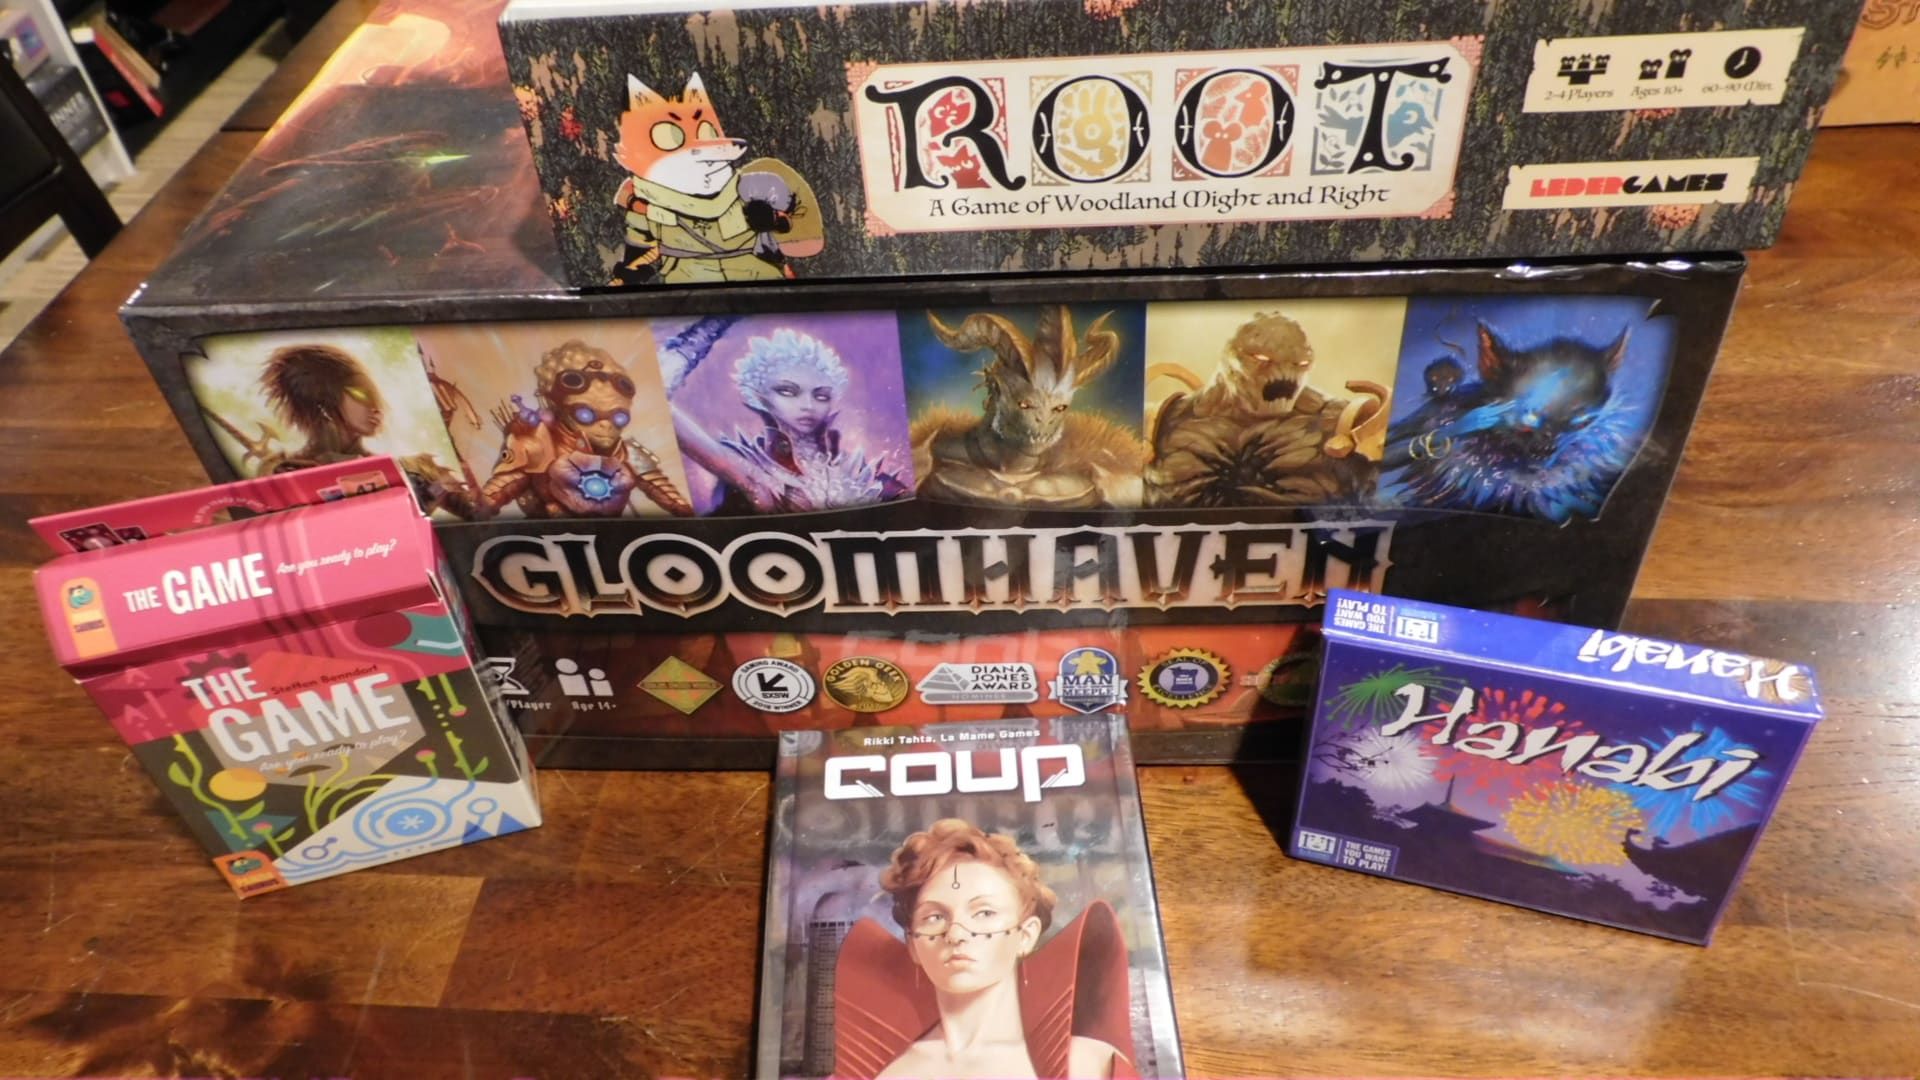 Some games on a table, including The Game, Coup, Hanabi, Root, and Gloomhaven.